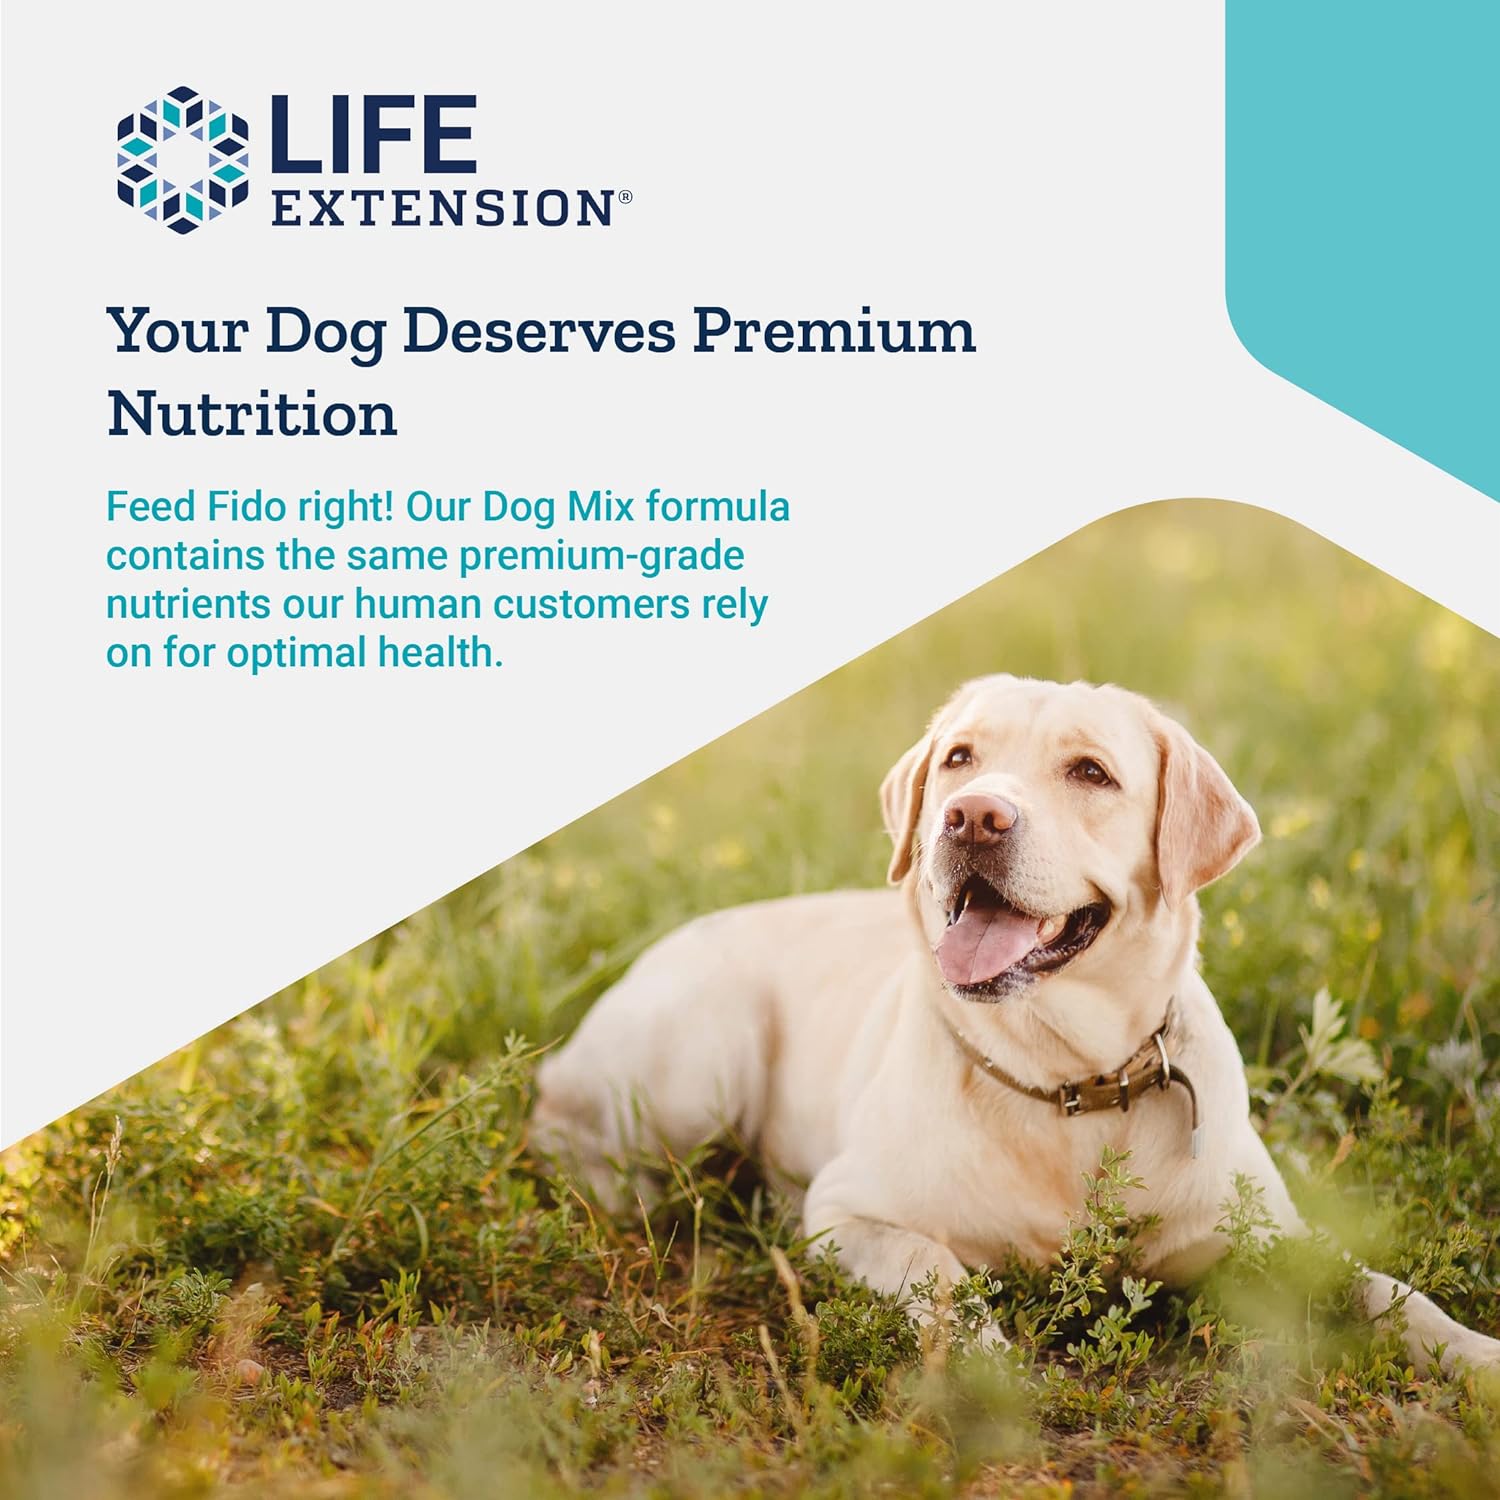 Life Extension Dog Mix - Daily Nutrition Care Supplement Powder for Your Canine Pet - Advanced Formula with Vitamins, Probiotics & Essential Fatty Acids - Gluten-Free, Non-GMO – 100 g, 60 Servings : Pet Supplements And Vitamins : Pet Supplies